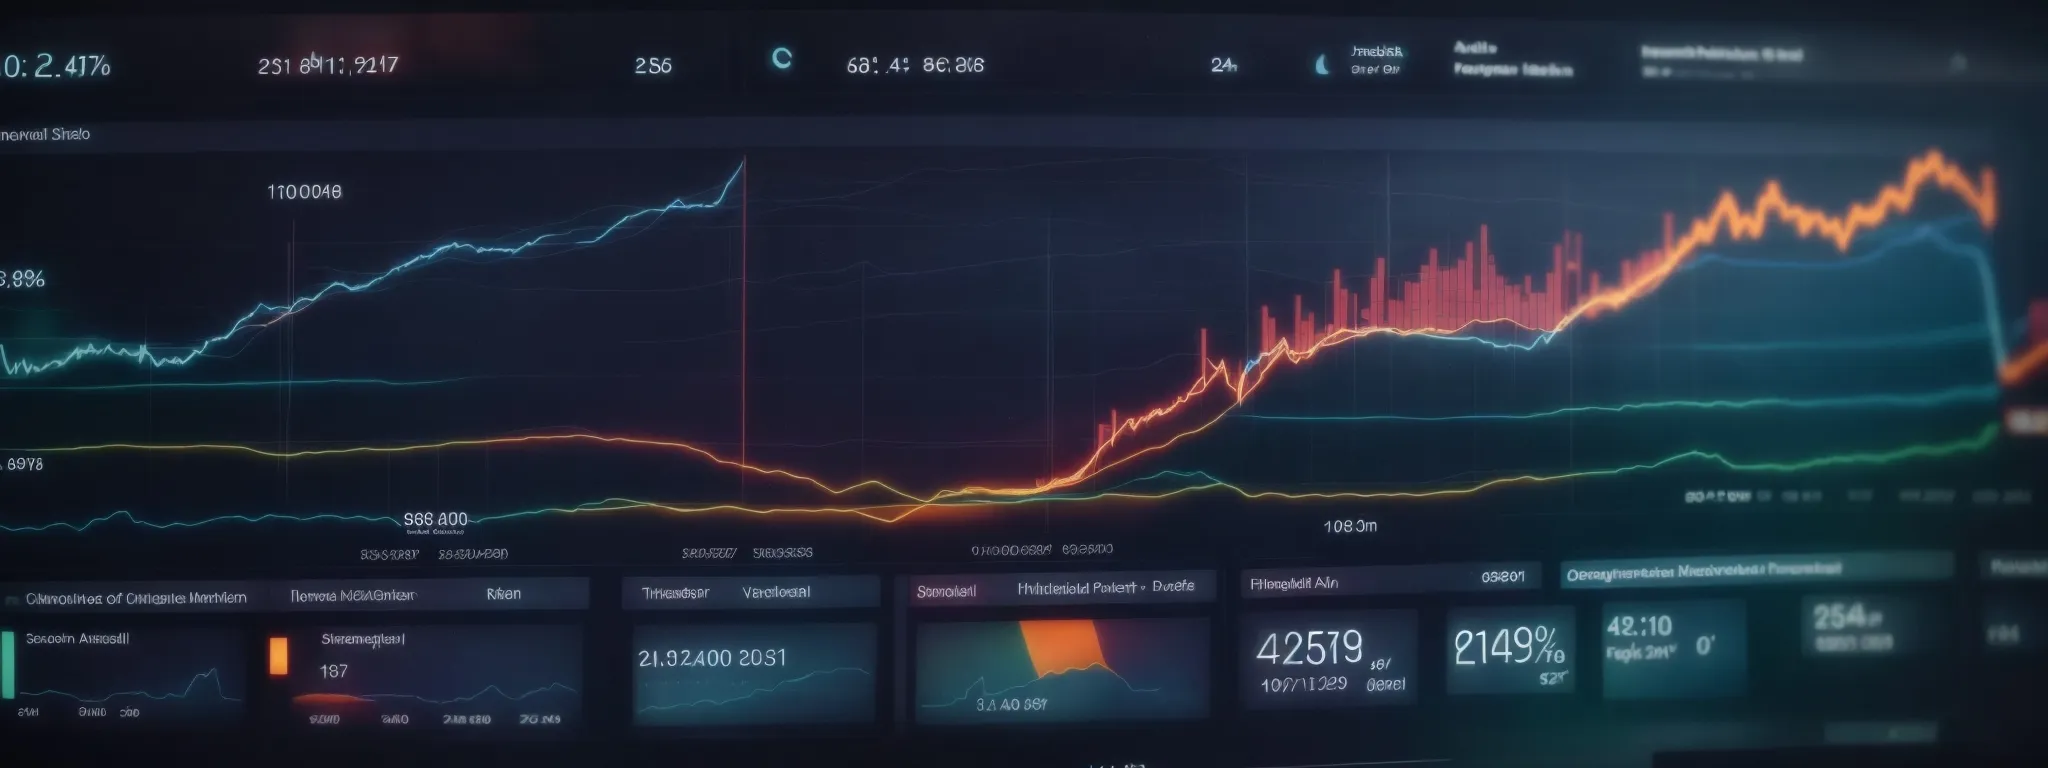 the vibrant dashboard of an analytics tool showcases graphs and charts depicting website performance metrics.